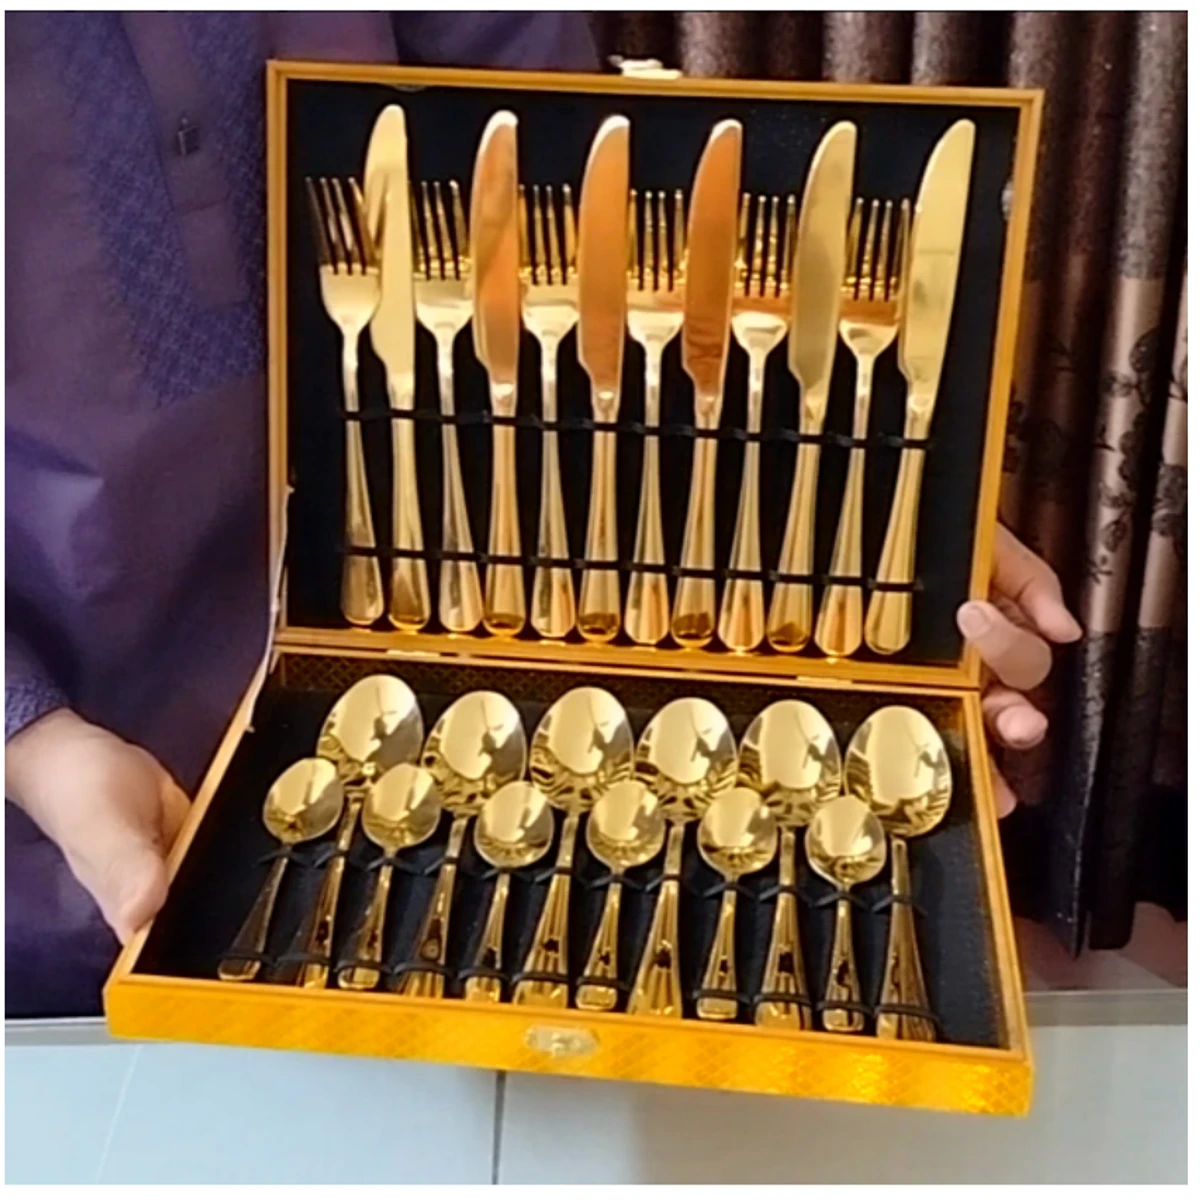 CUTLERY GOLD-PLATED 24-PIECE SET